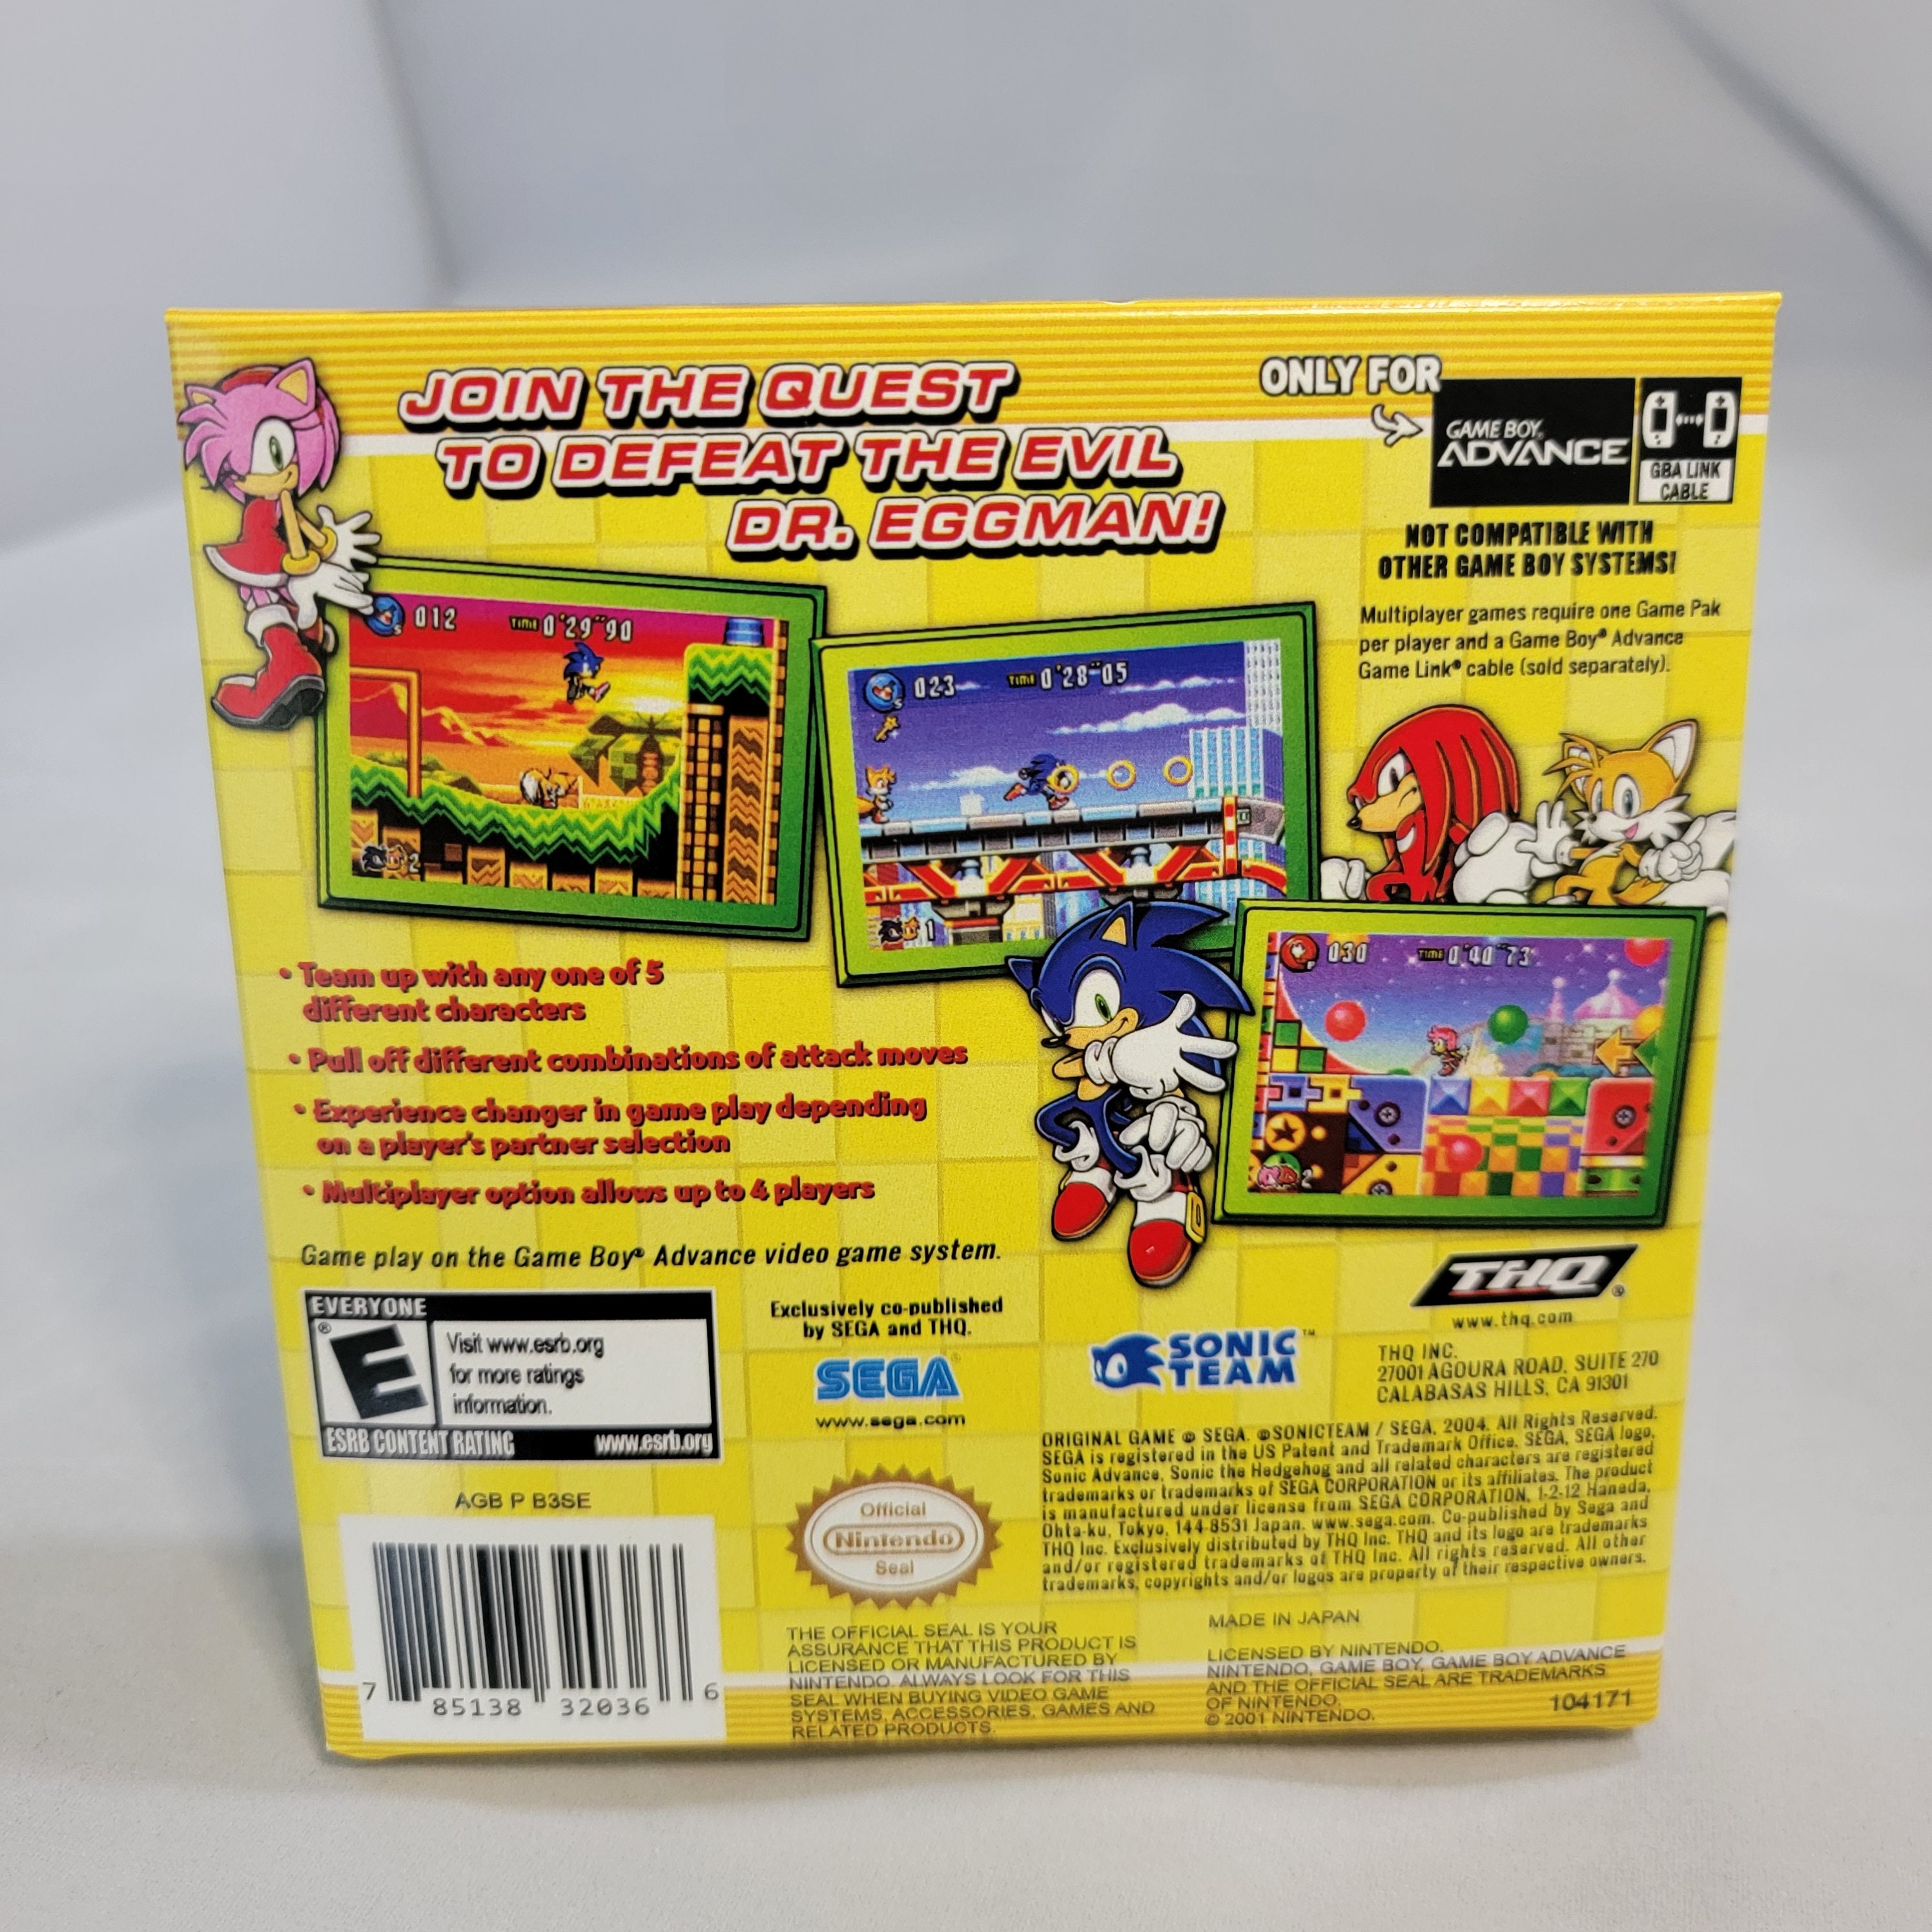 Sonic Advance Nintendo Game Boy Advance *Box Only* No Game Authentic